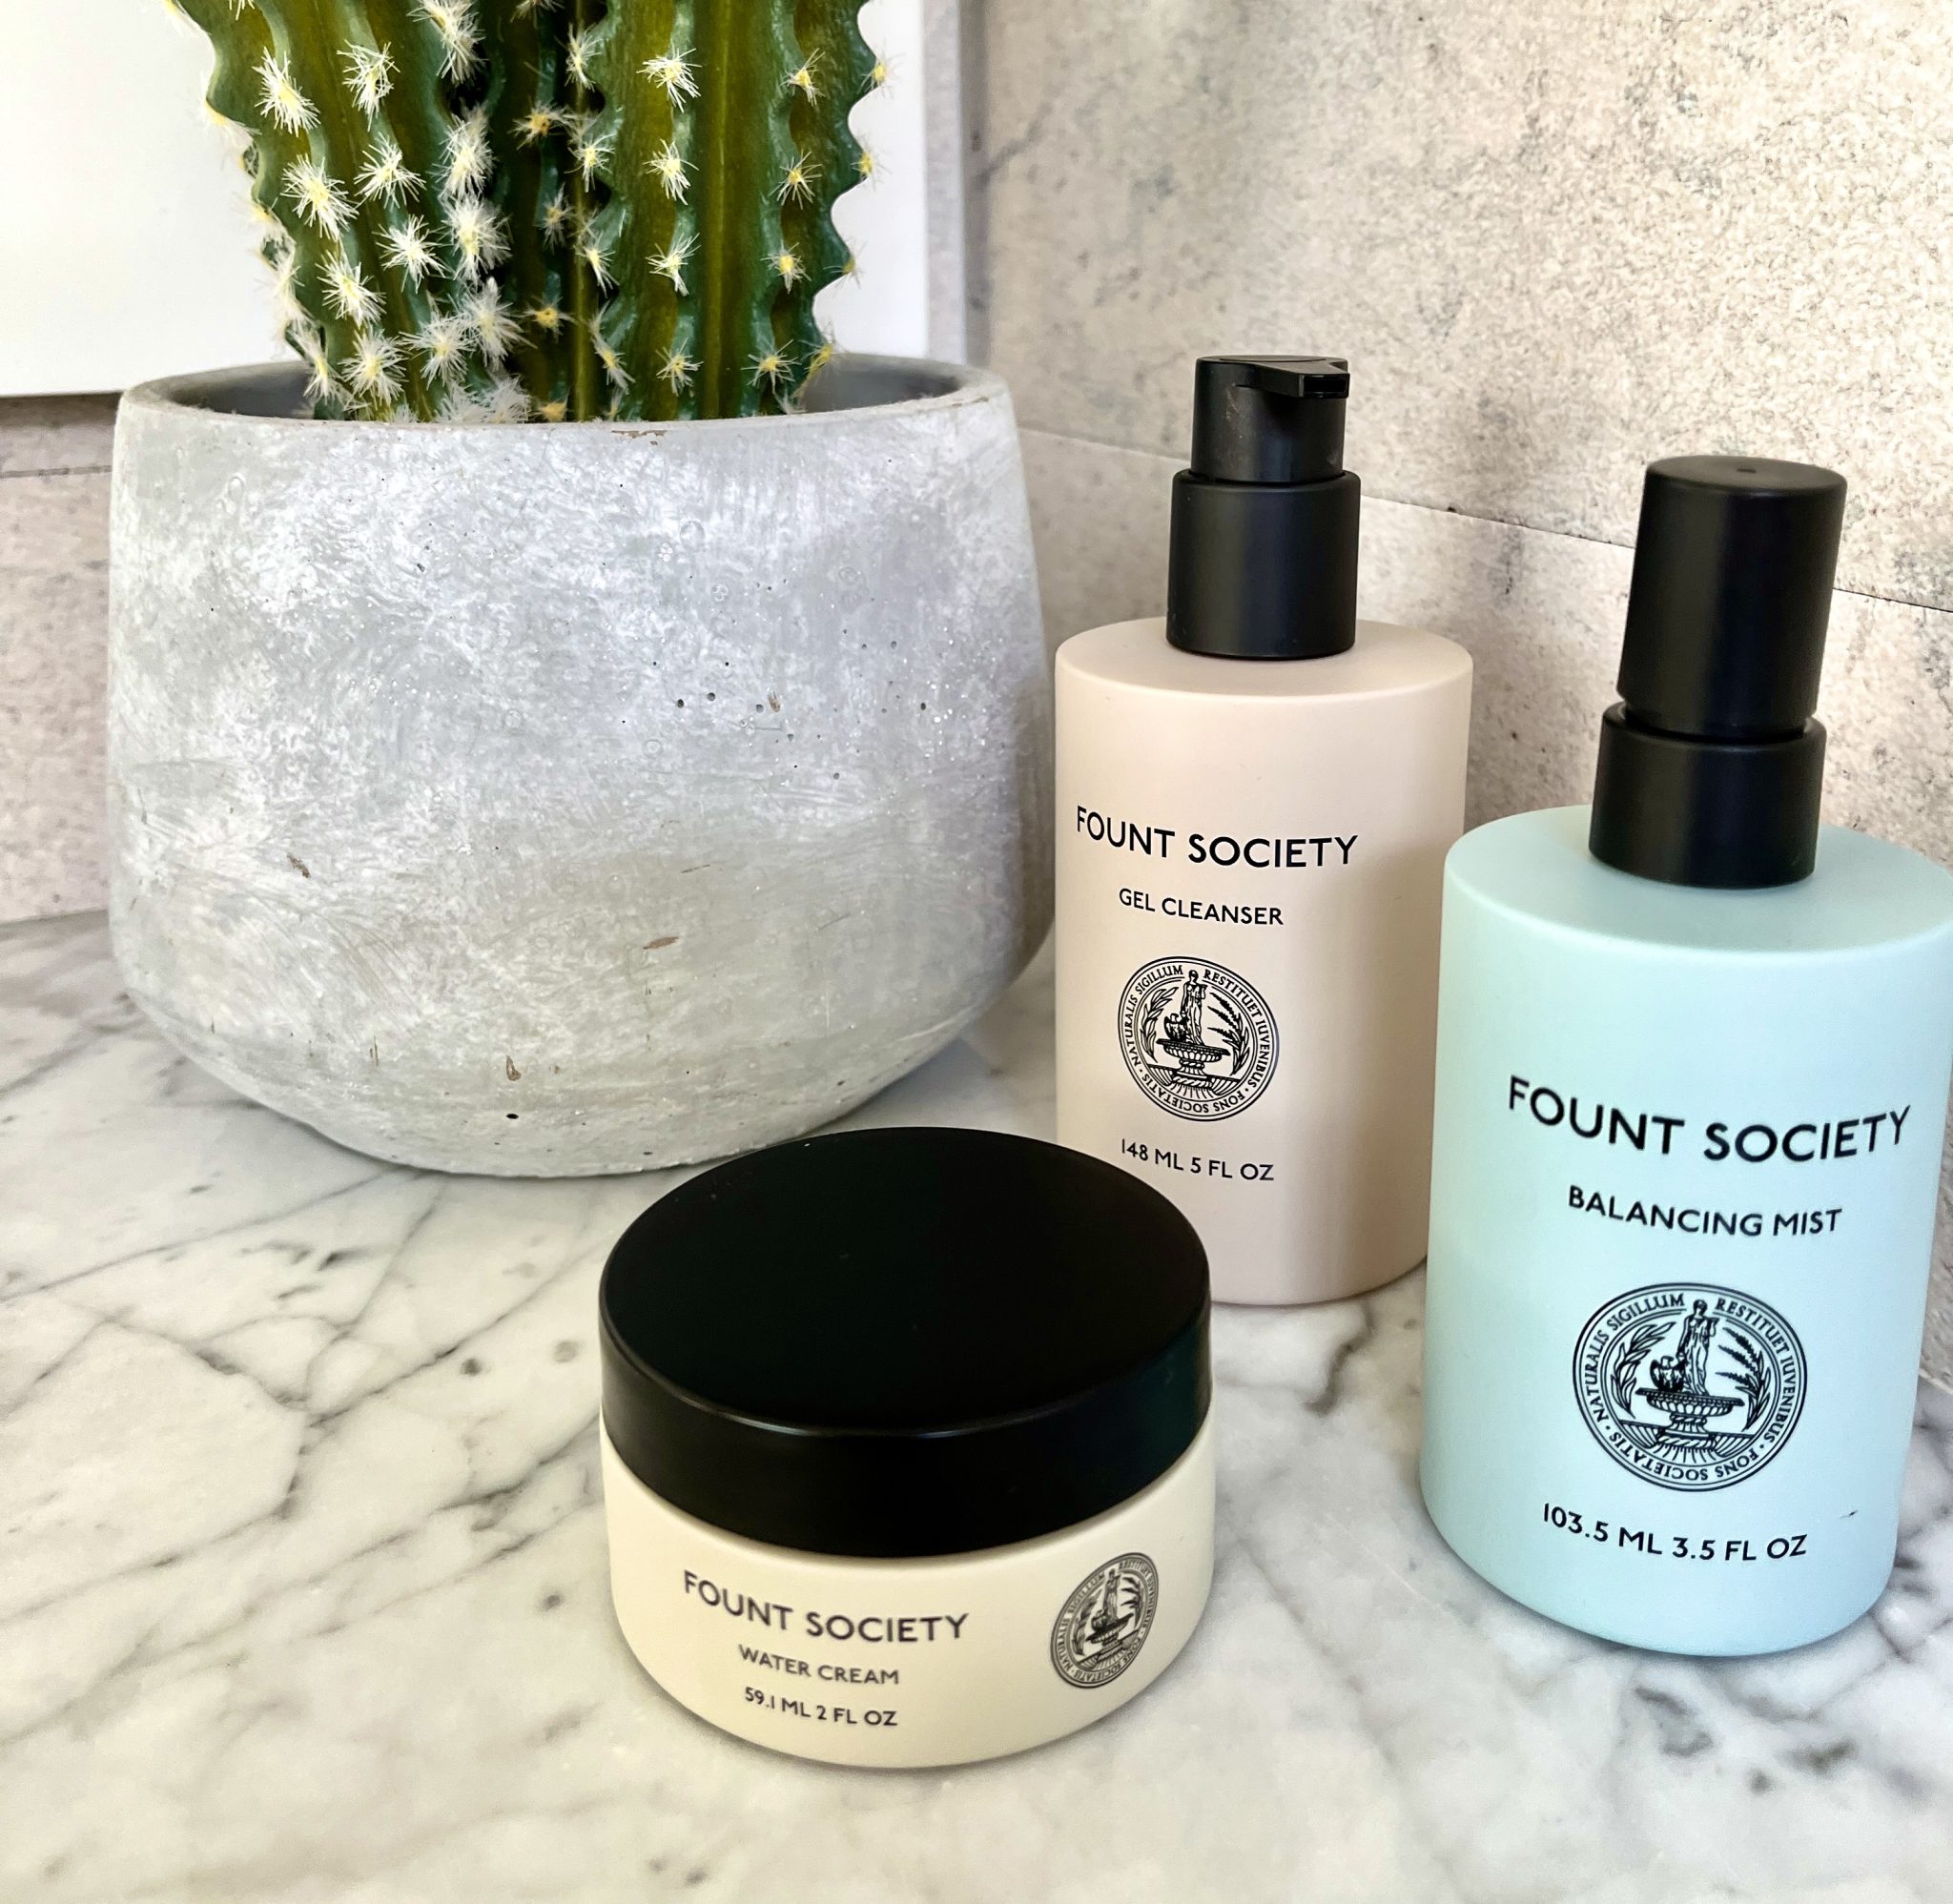 I'm currently using Fount Society's luxurious moisturizer and Gel Cleanser in my guest bathroom for tips to elevate a guest bathroom